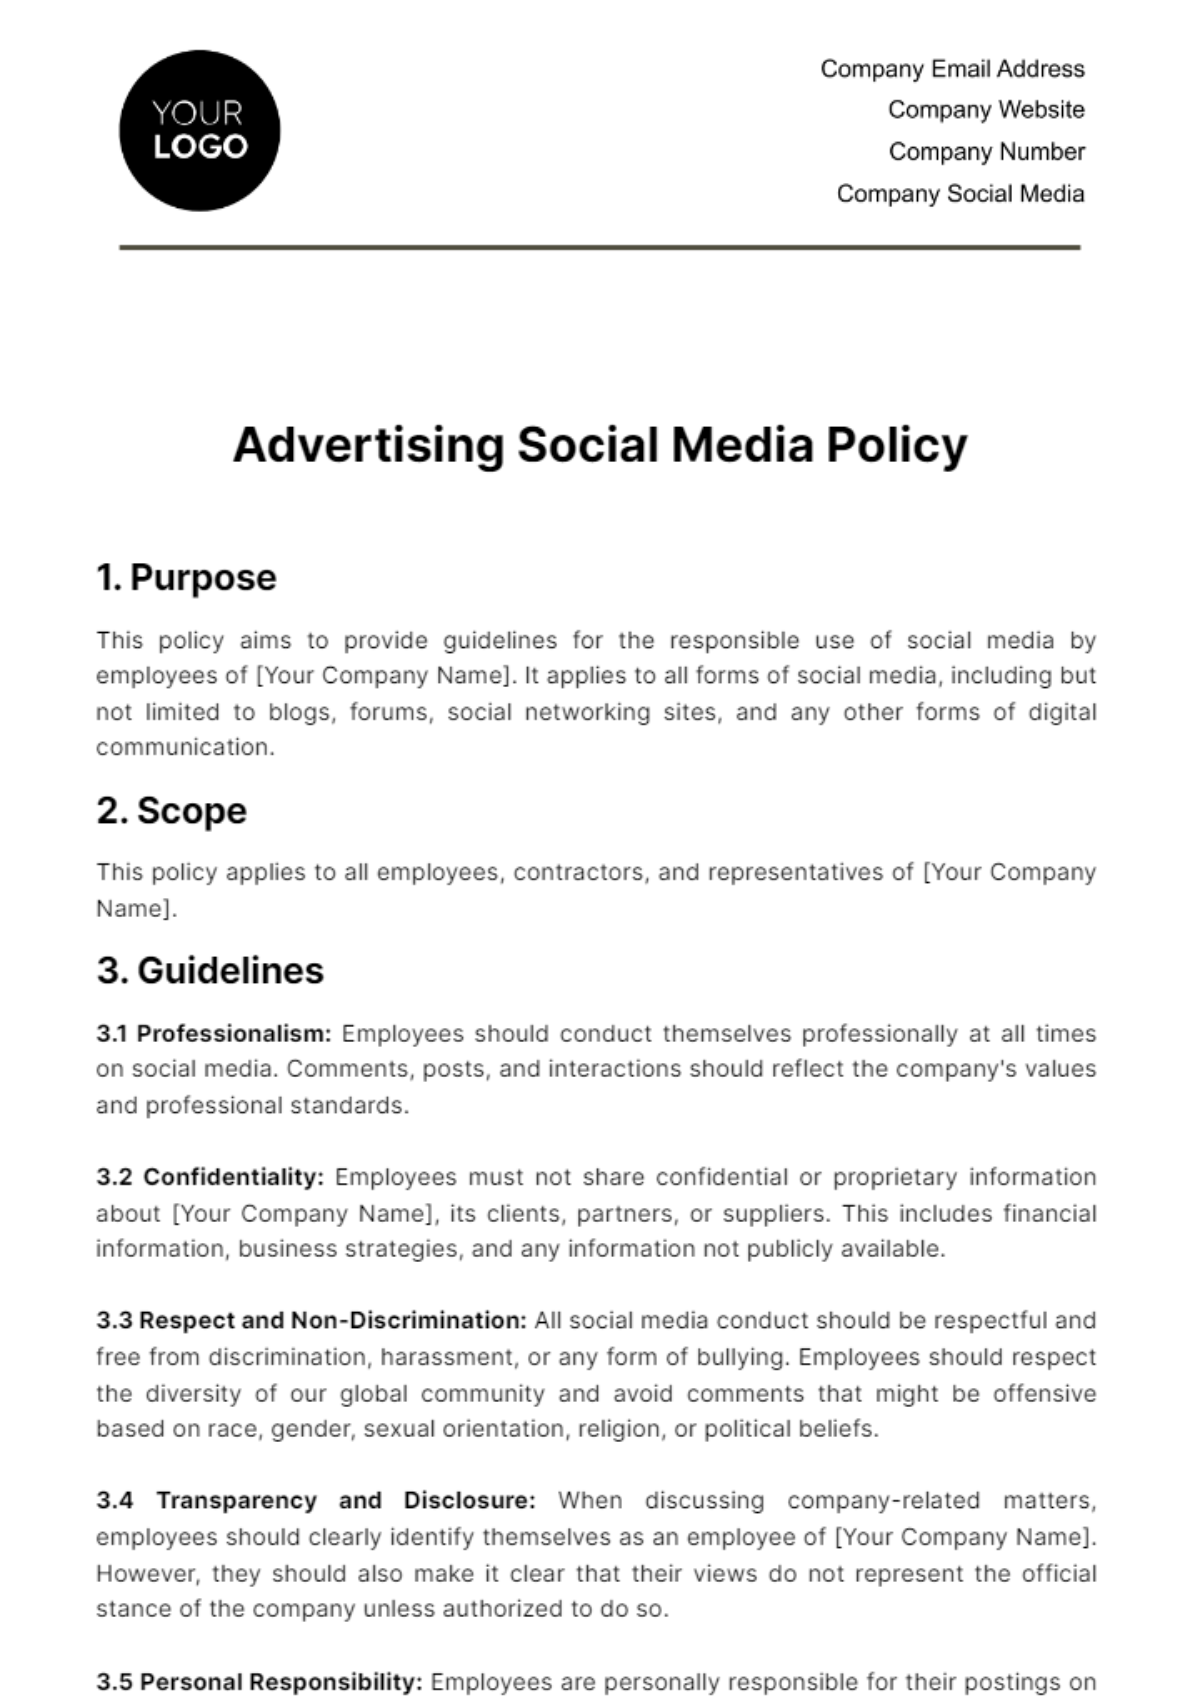 Free Advertising Social Media Policy Template